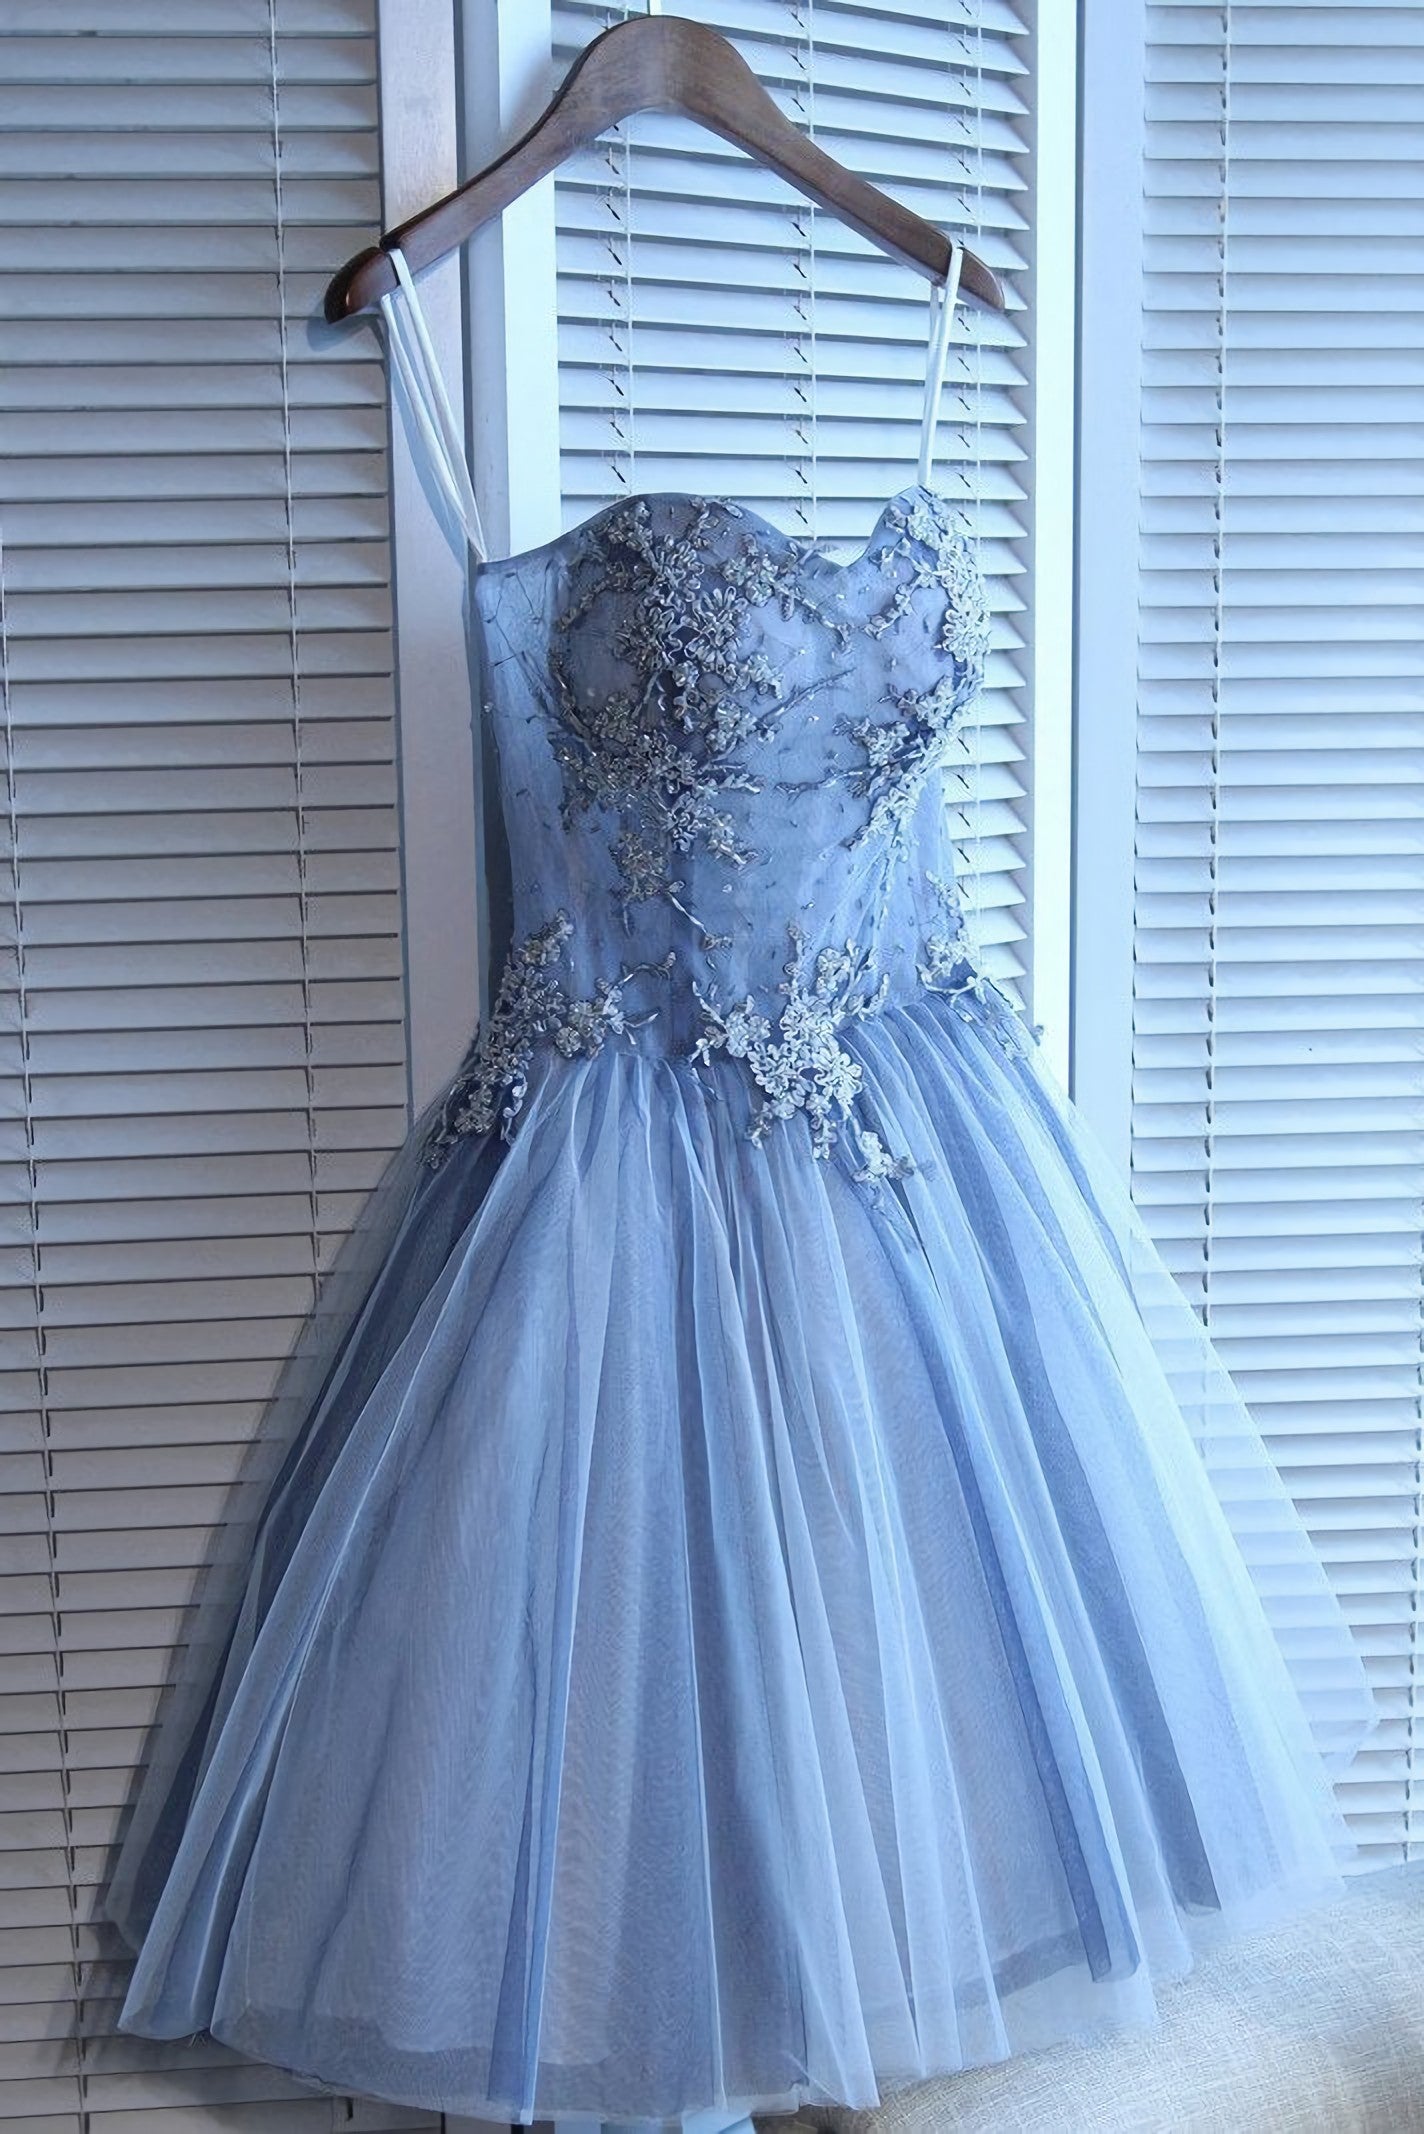 Sweetheart Strapless Corset Homecoming Dresses, Beads Blue Lace Up Tulle Short Corset Prom Dresses outfit, Strapless Dress